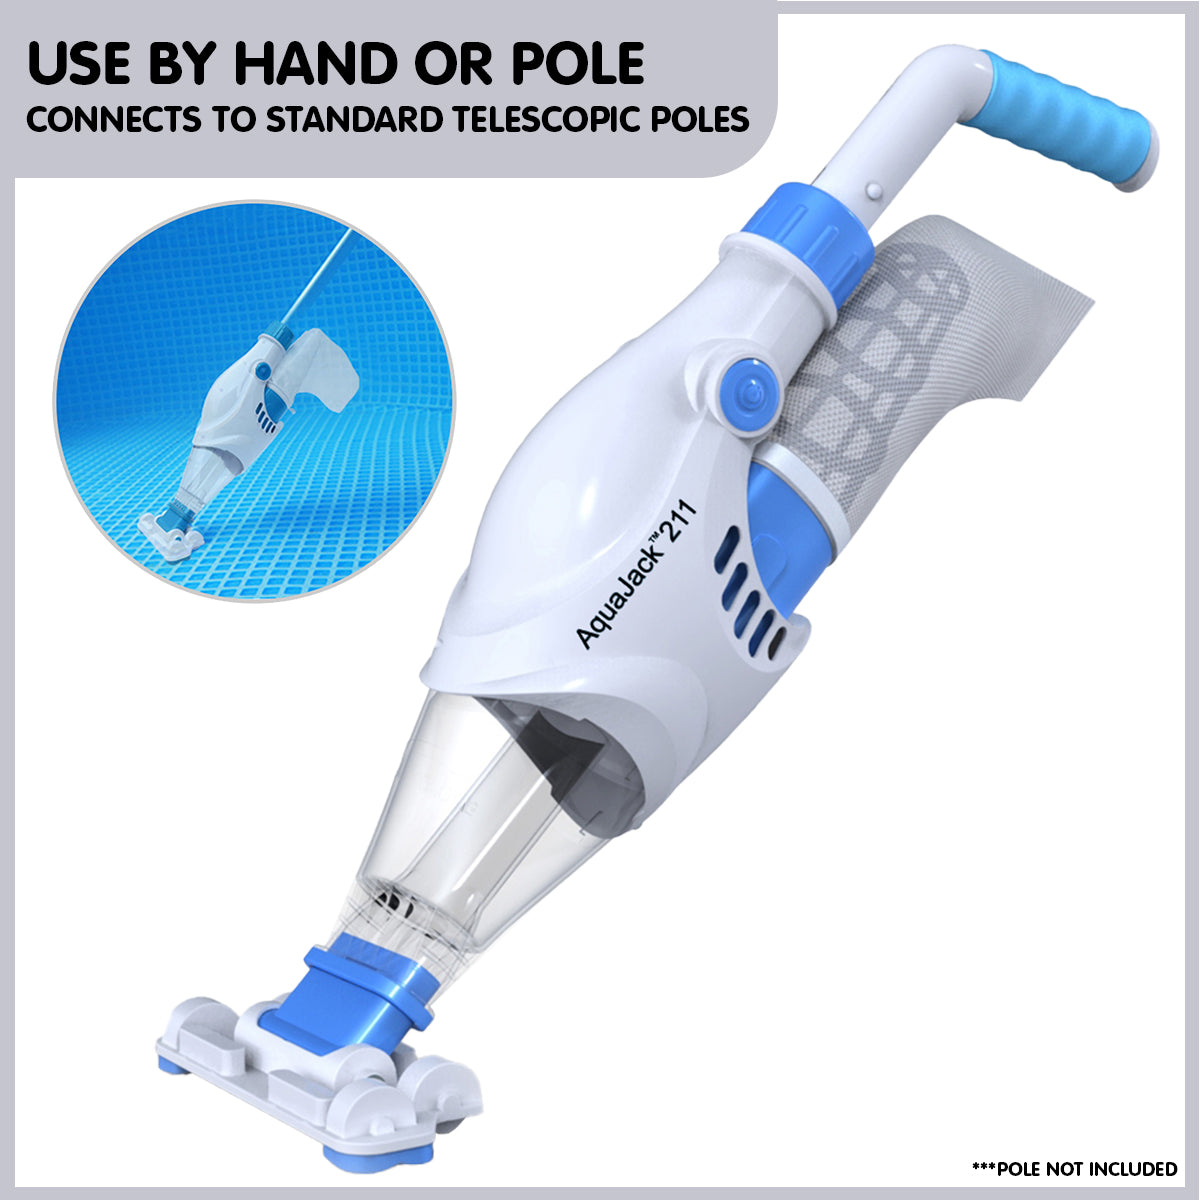 Aquajack 211 Cordless Rechargeable Spa and Pool Vacuum Cleaner-Pool Cleaners-PEROZ Accessories